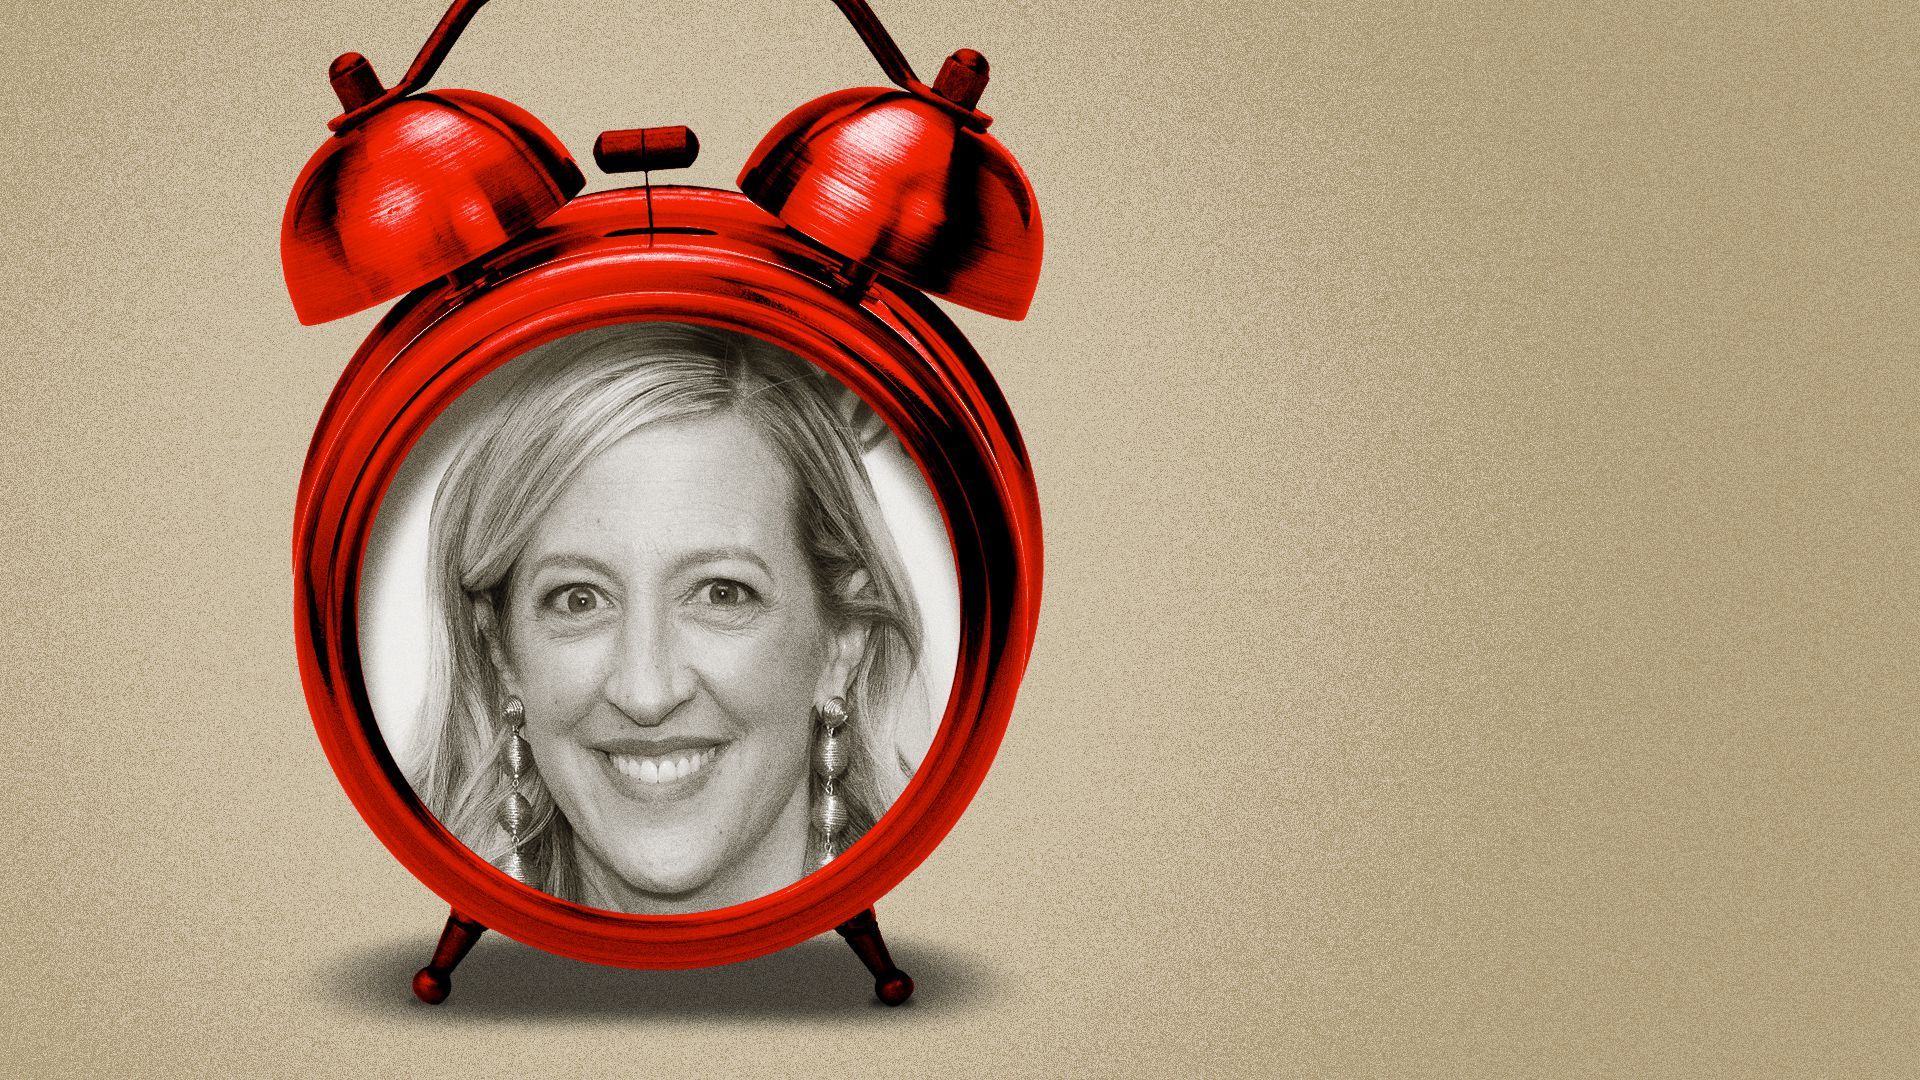 Photo illustration collage of Susan Tynan inside a red alarm clock.